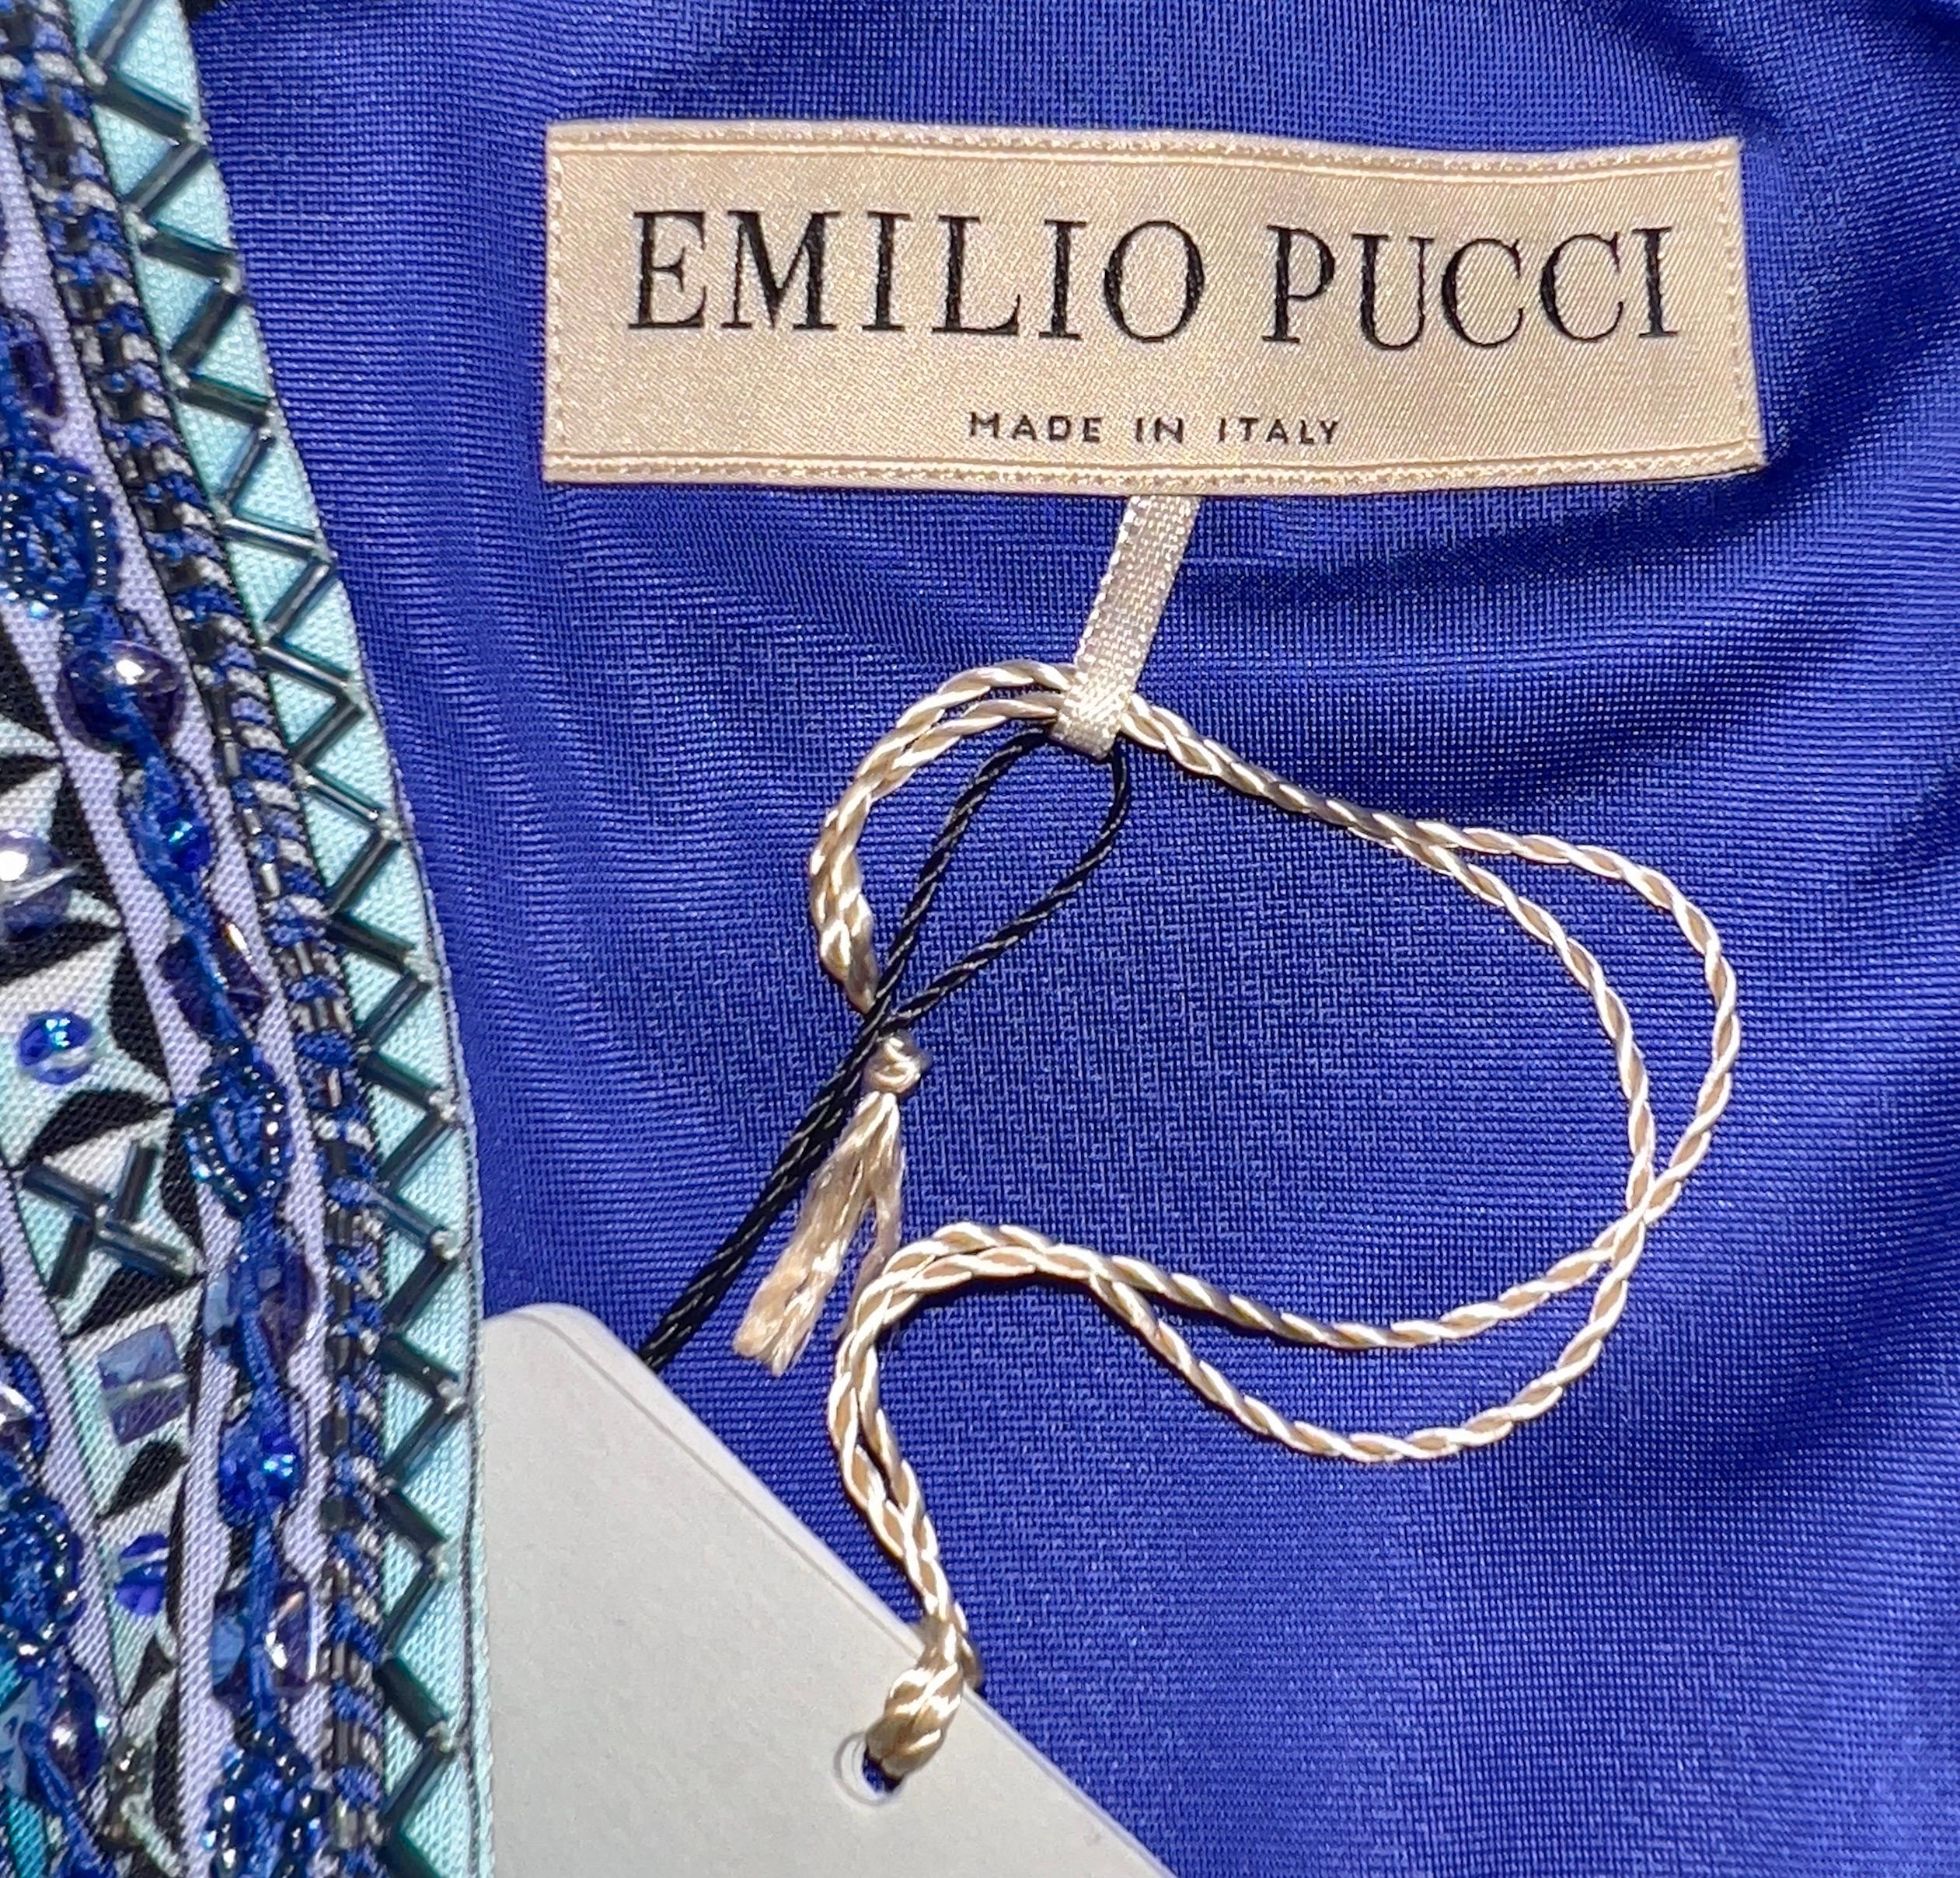 UNWORN Emilio Pucci Embroidered Signature Print Embellished Maxi Dress Gown 42 1